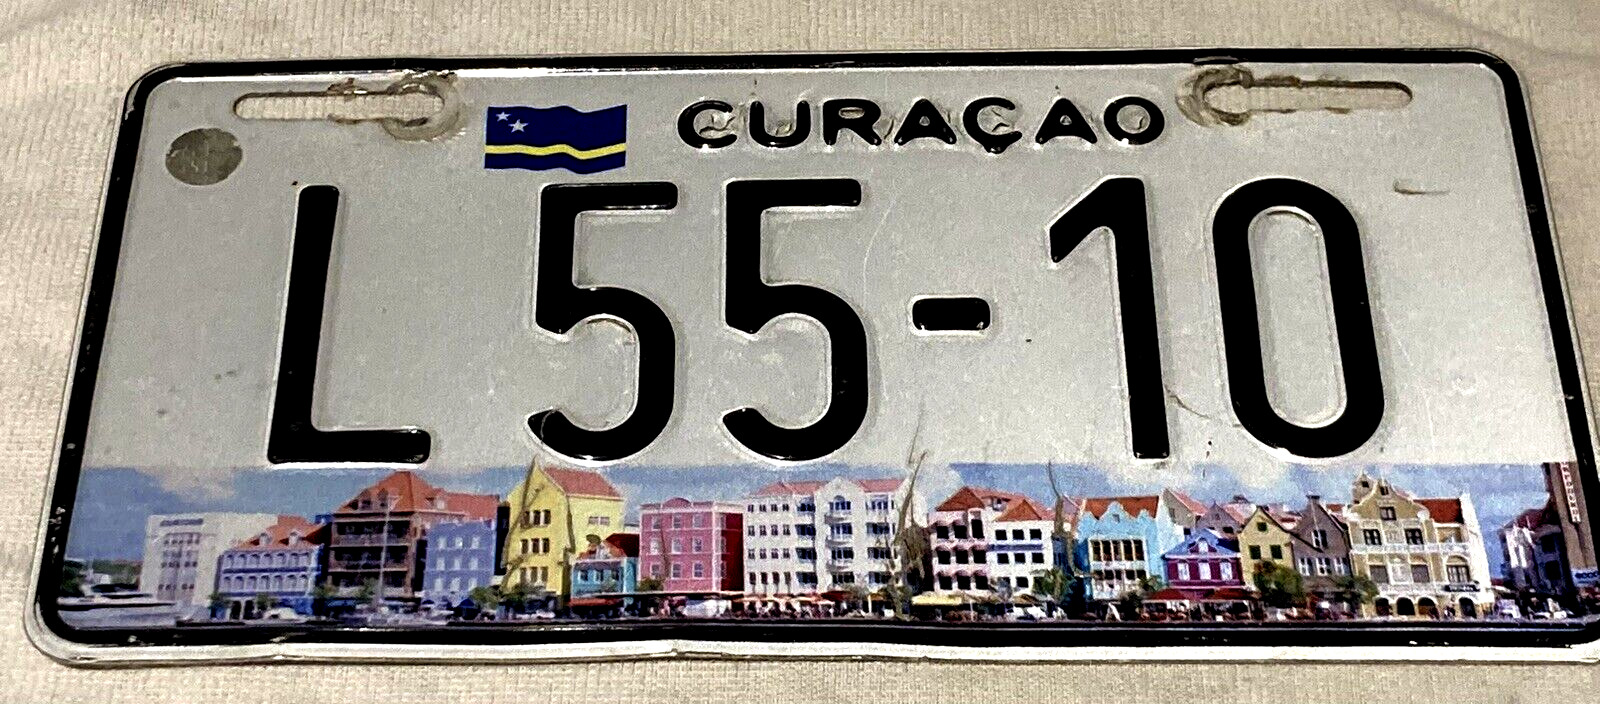 2014 Curacao license plate Flag Graphic Willemstad Skyline Caribbean L 55-10 tag